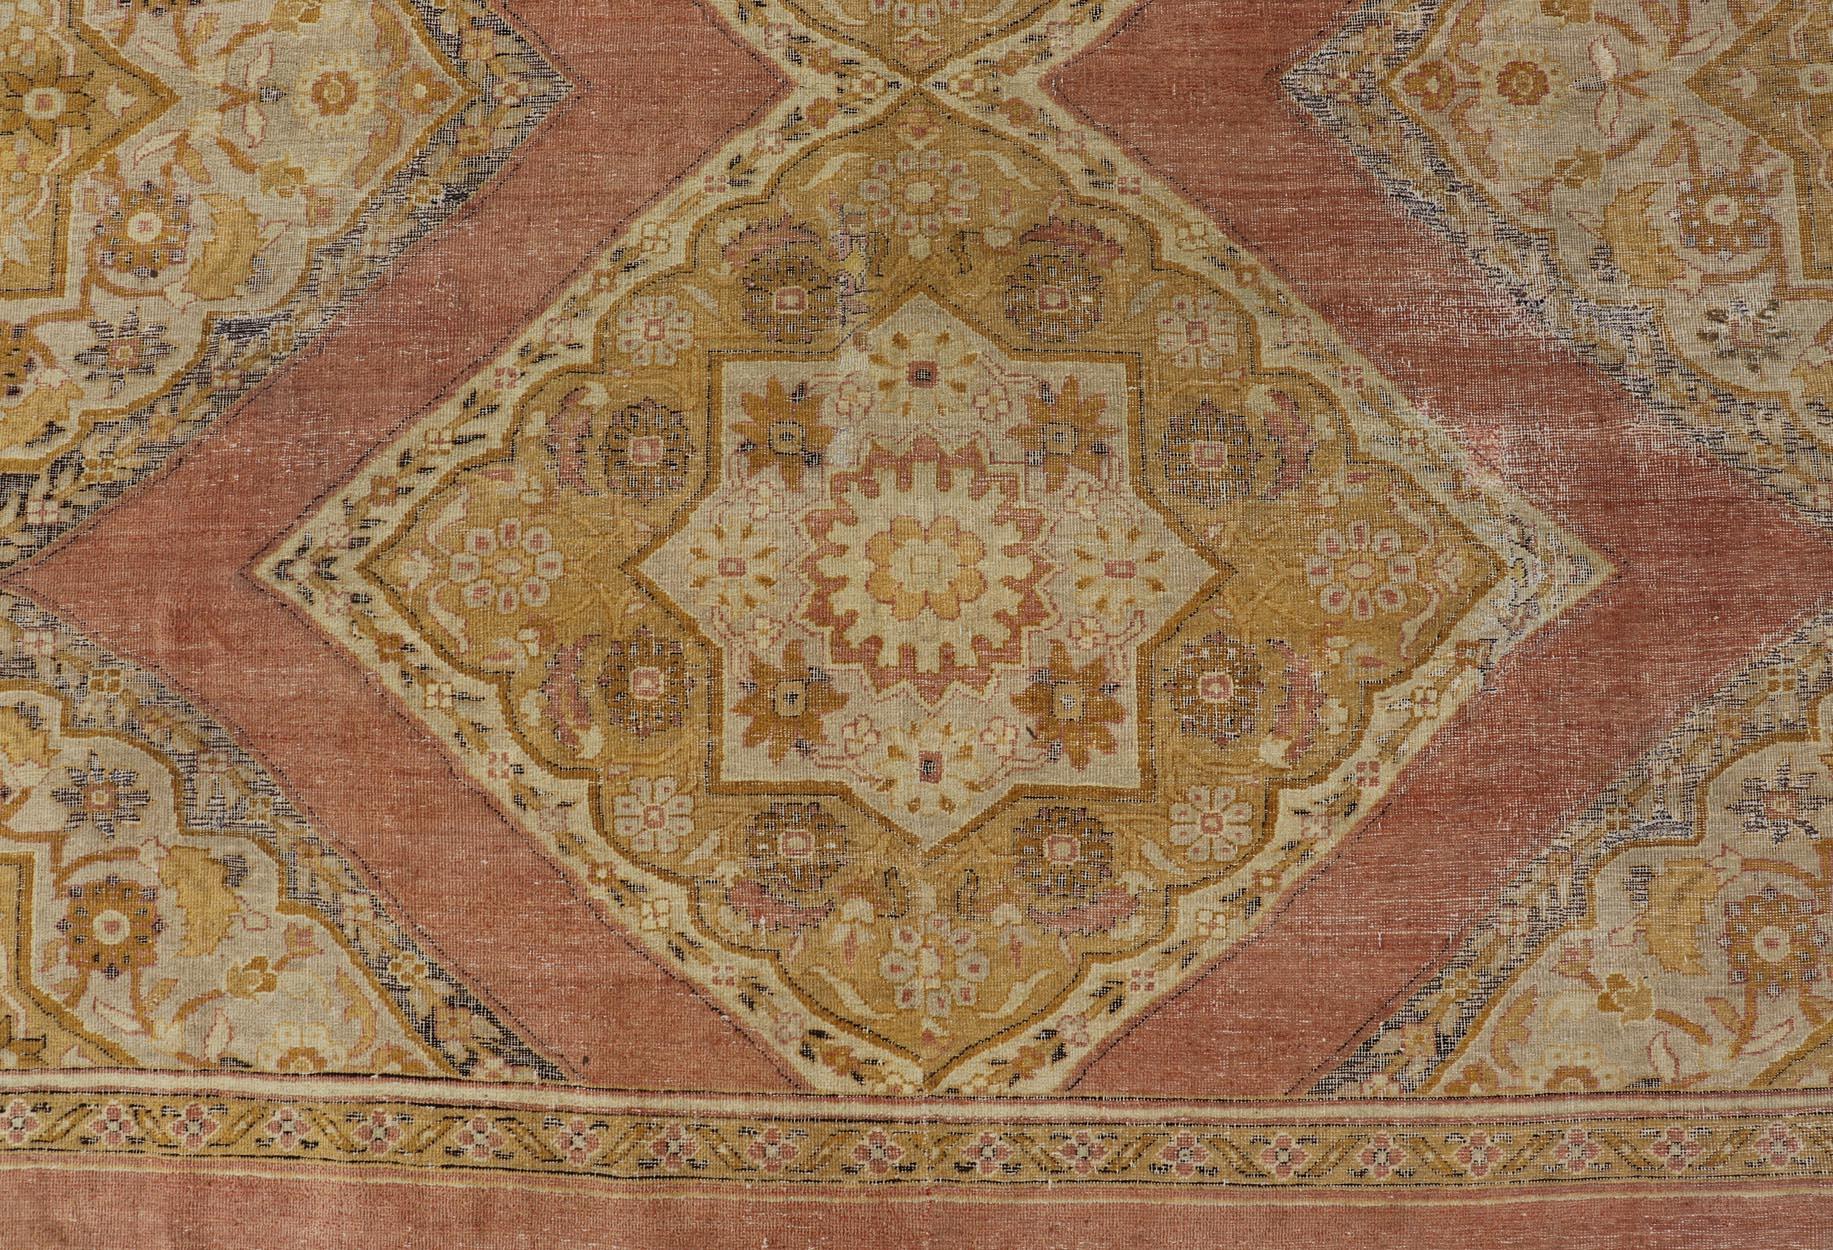 Antique Indian Agra Rug in Acidic Yellow Green, Pink and Ivory In Good Condition For Sale In Atlanta, GA